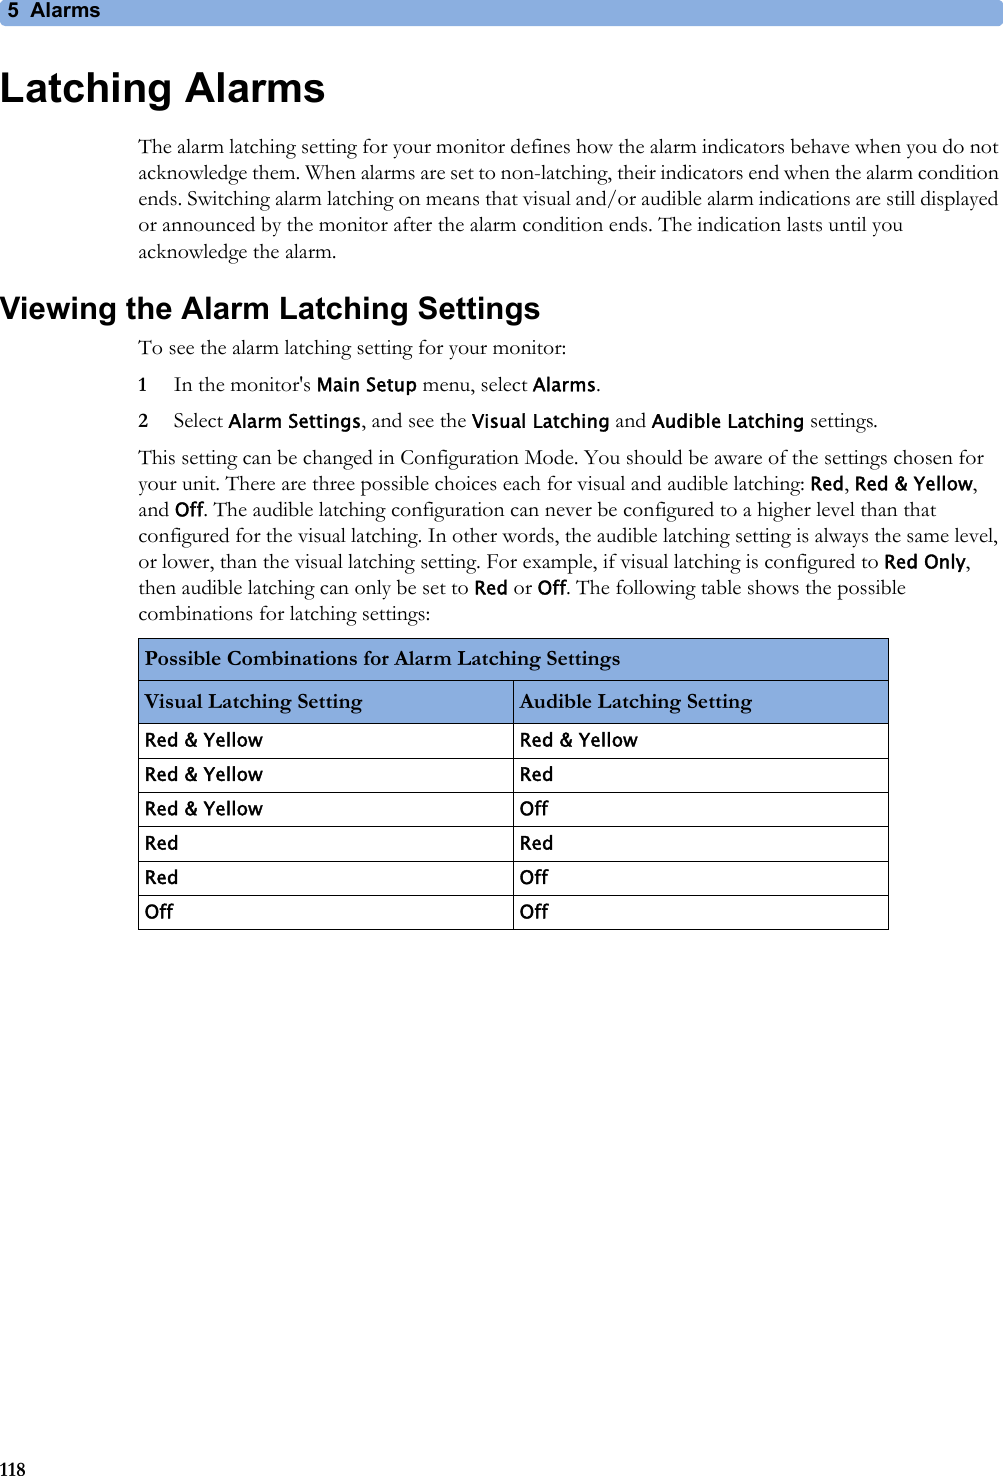 5 Alarms118Latching AlarmsThe alarm latching setting for your monitor defines how the alarm indicators behave when you do not acknowledge them. When alarms are set to non-latching, their indicators end when the alarm condition ends. Switching alarm latching on means that visual and/or audible alarm indications are still displayed or announced by the monitor after the alarm condition ends. The indication lasts until you acknowledge the alarm.Viewing the Alarm Latching SettingsTo see the alarm latching setting for your monitor:1In the monitor&apos;s Main Setup menu, select Alarms.2Select Alarm Settings, and see the Visual Latching and Audible Latching settings.This setting can be changed in Configuration Mode. You should be aware of the settings chosen for your unit. There are three possible choices each for visual and audible latching: Red, Red &amp; Yellow, and Off. The audible latching configuration can never be configured to a higher level than that configured for the visual latching. In other words, the audible latching setting is always the same level, or lower, than the visual latching setting. For example, if visual latching is configured to Red Only, then audible latching can only be set to Red or Off. The following table shows the possible combinations for latching settings:Possible Combinations for Alarm Latching SettingsVisual Latching Setting Audible Latching SettingRed &amp; Yellow Red &amp; YellowRed &amp; Yellow RedRed &amp; Yellow OffRed RedRed OffOff Off